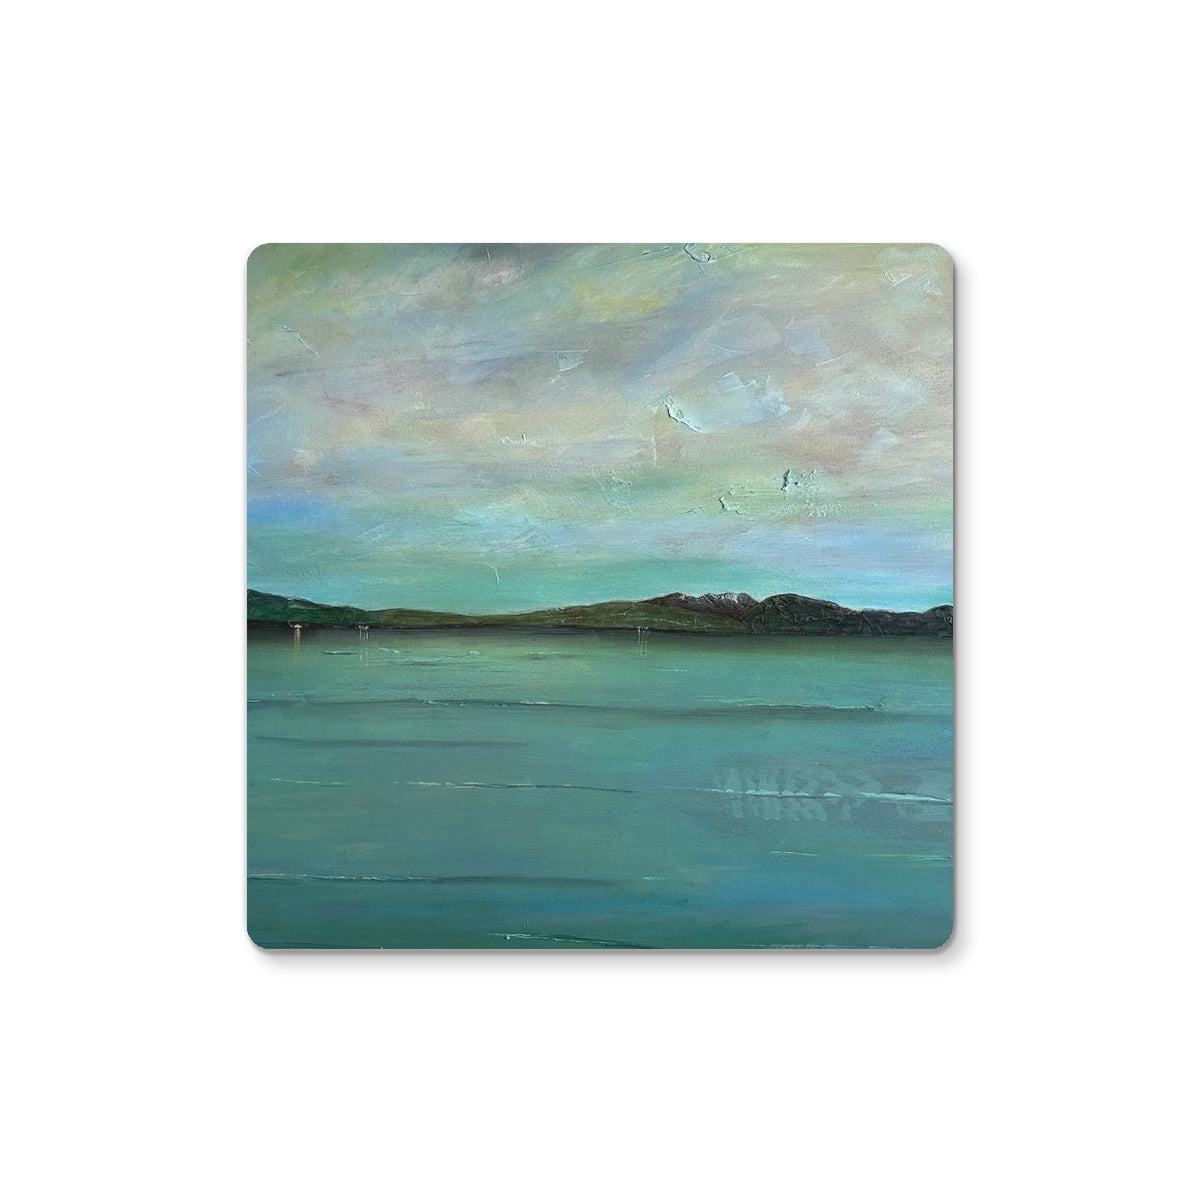 An Ethereal Loch Lomond Art Gifts Coaster-Homeware-Scottish Lochs & Mountains Art Gallery-2 Coasters-Paintings, Prints, Homeware, Art Gifts From Scotland By Scottish Artist Kevin Hunter